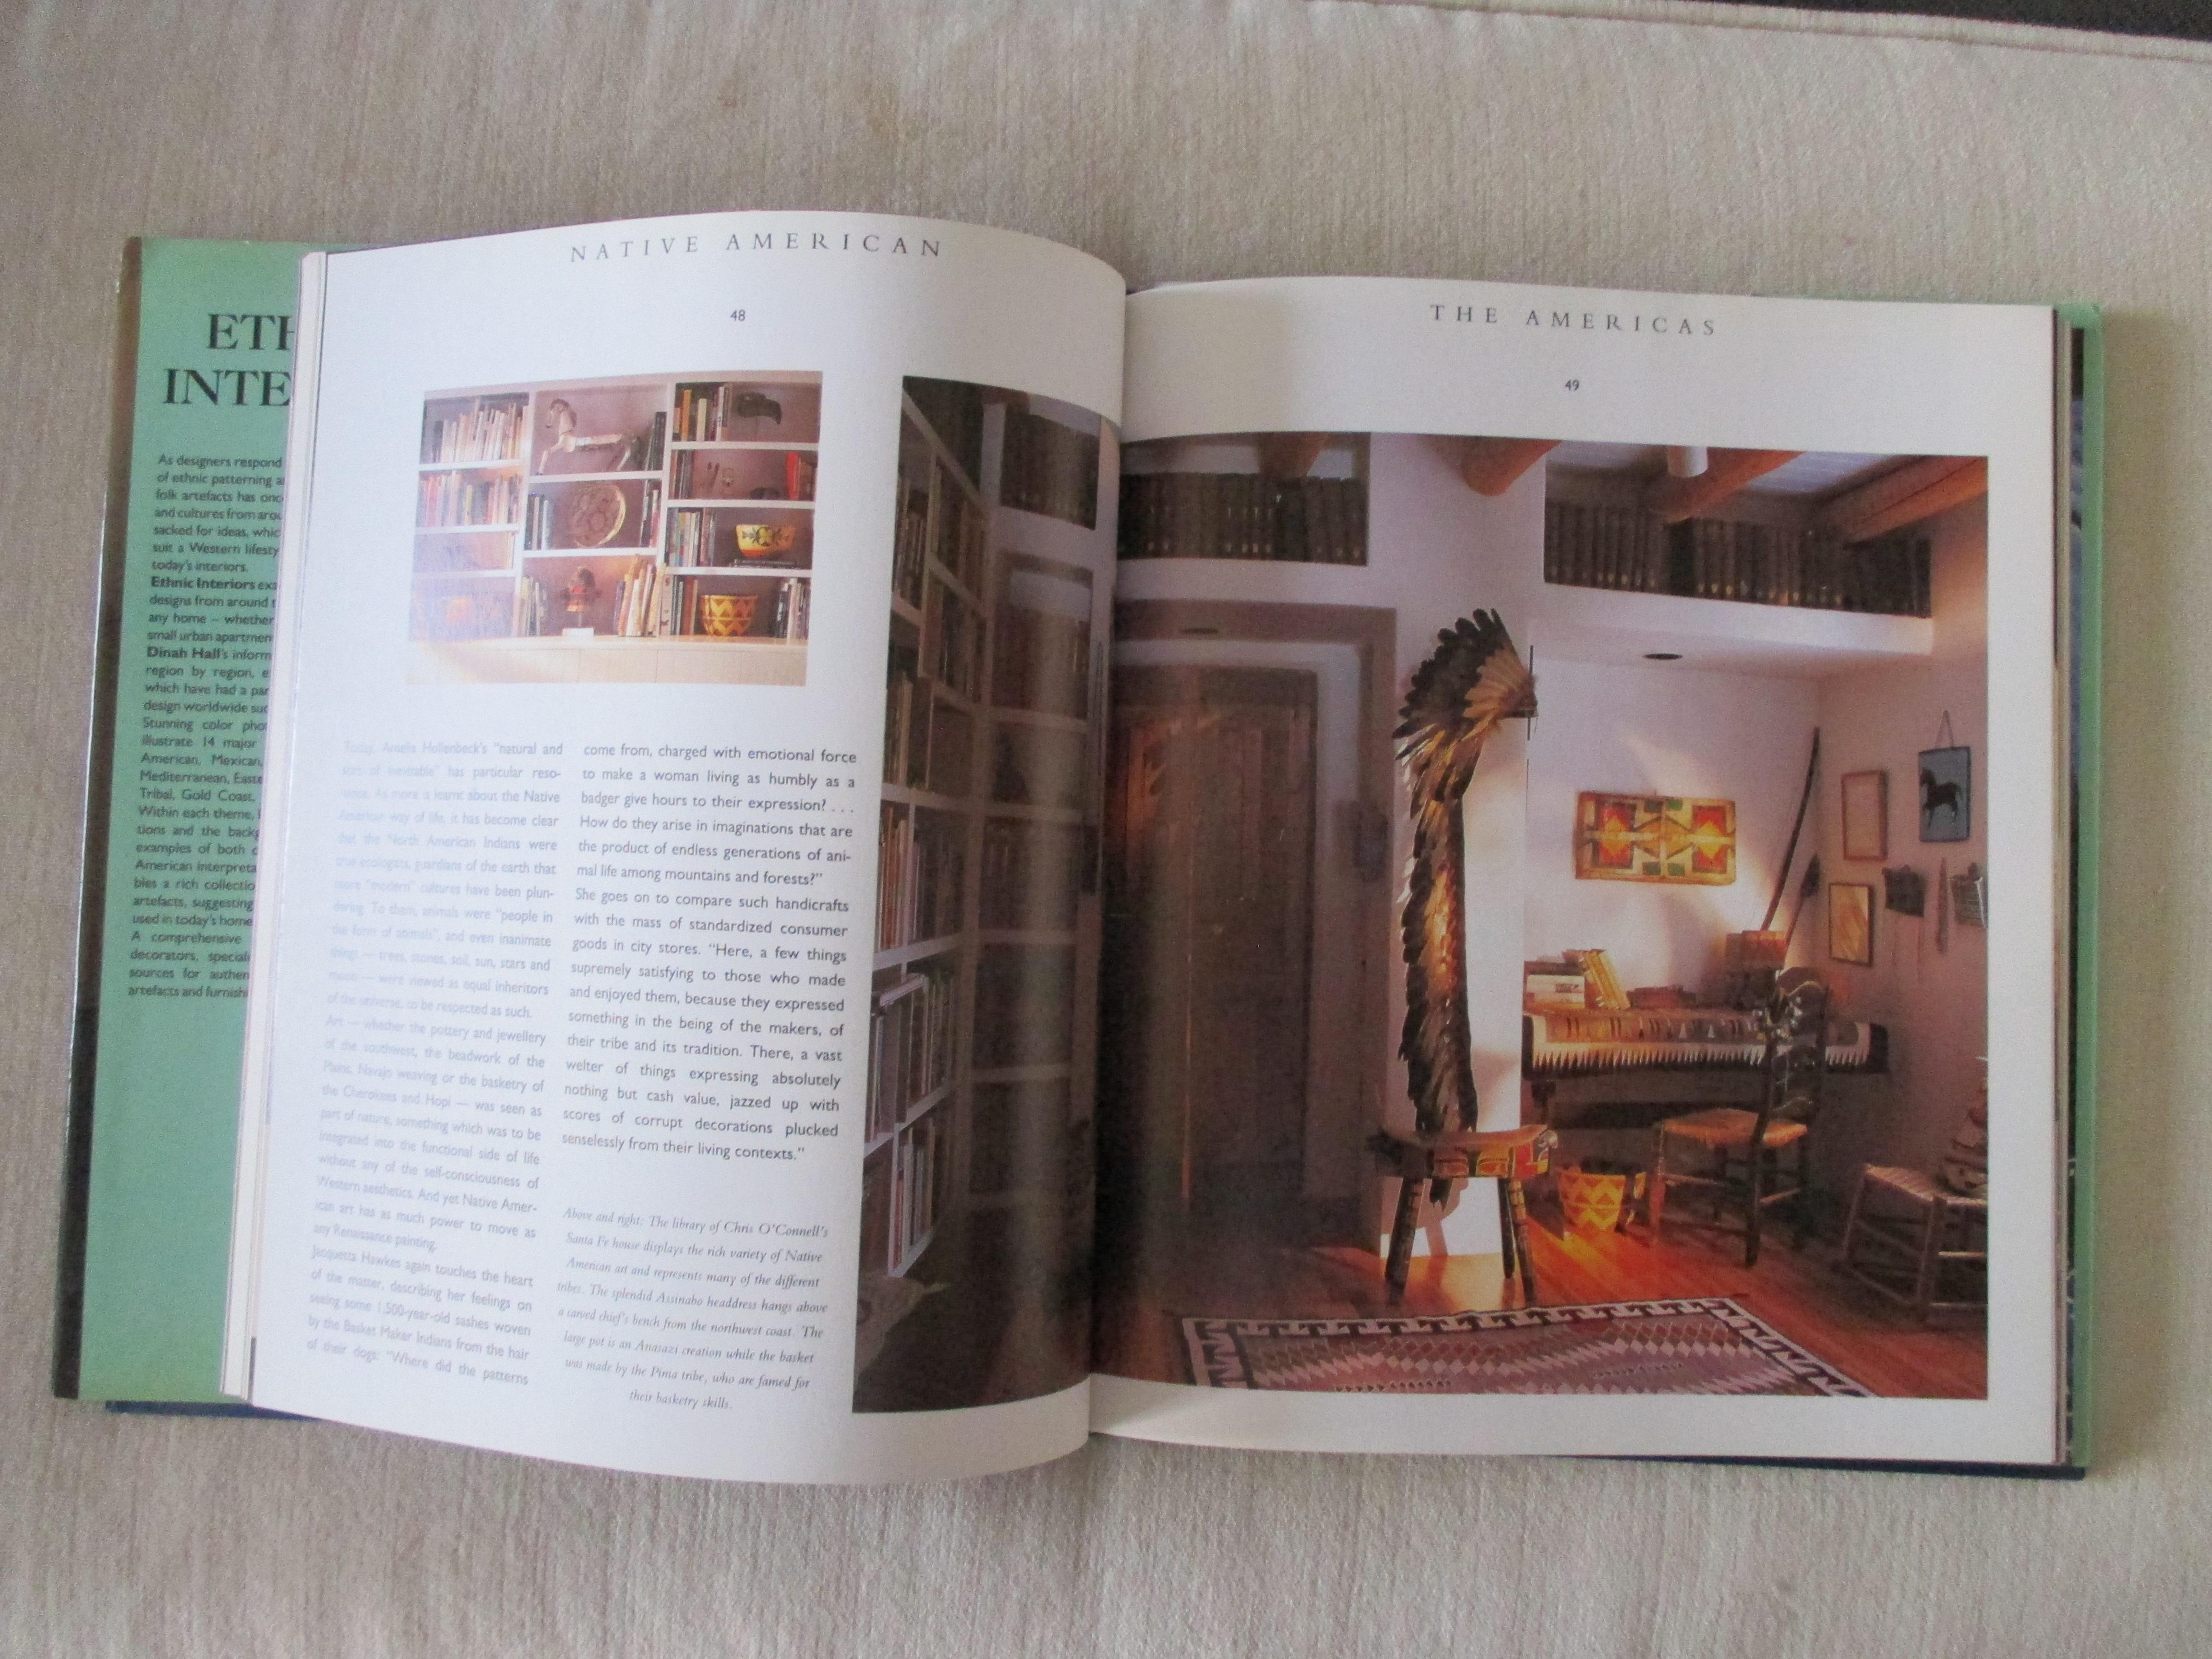 Ethnic interiors hardcover book by Dina Hall
Shows rooms decorated along fourteen different themes, including cowboy, Native American, Mexican, Nordic, Celtic, Mediterranean, North African, Japanese, and Indian. Part of an unofficial series, this